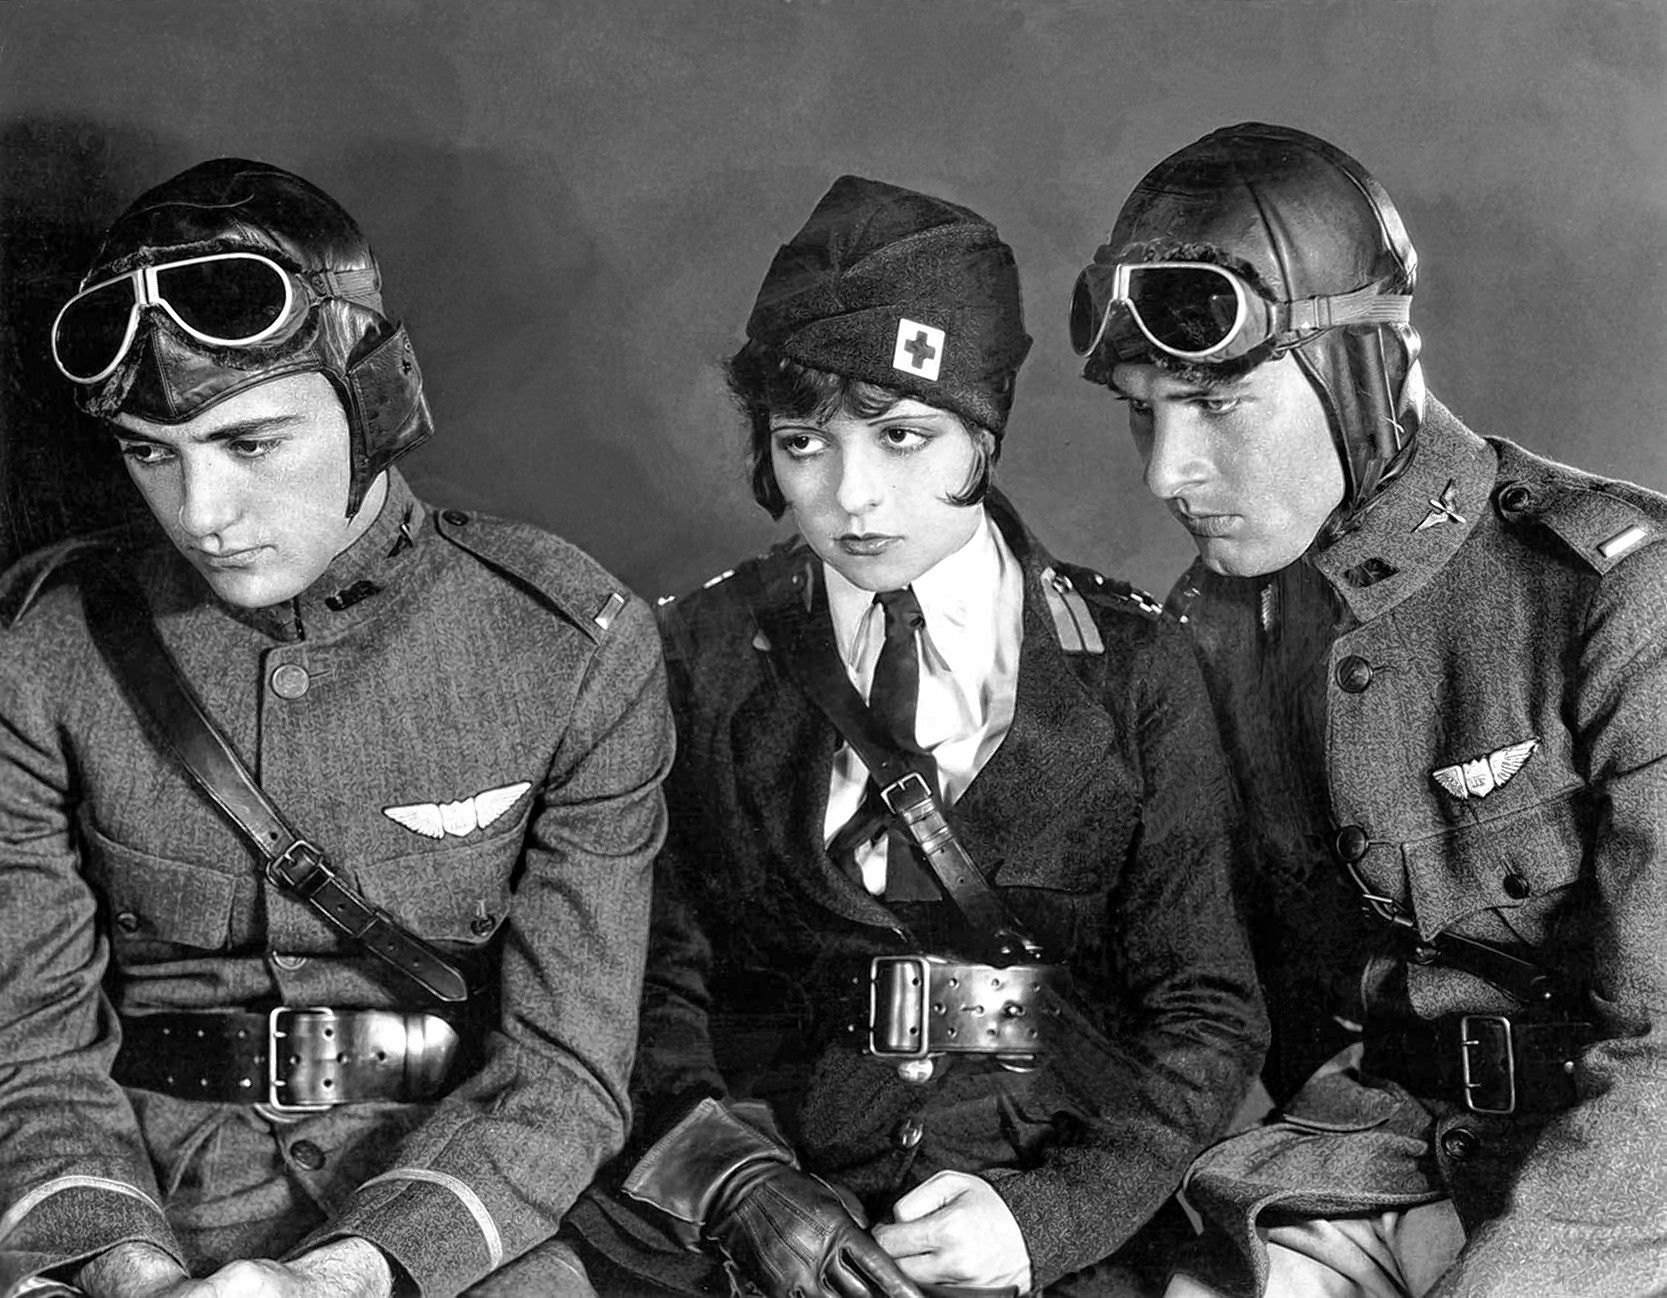 Red River to show silent film 'Wings', with live music accompaniment by  Jeff Rapsis | The Concord Insider